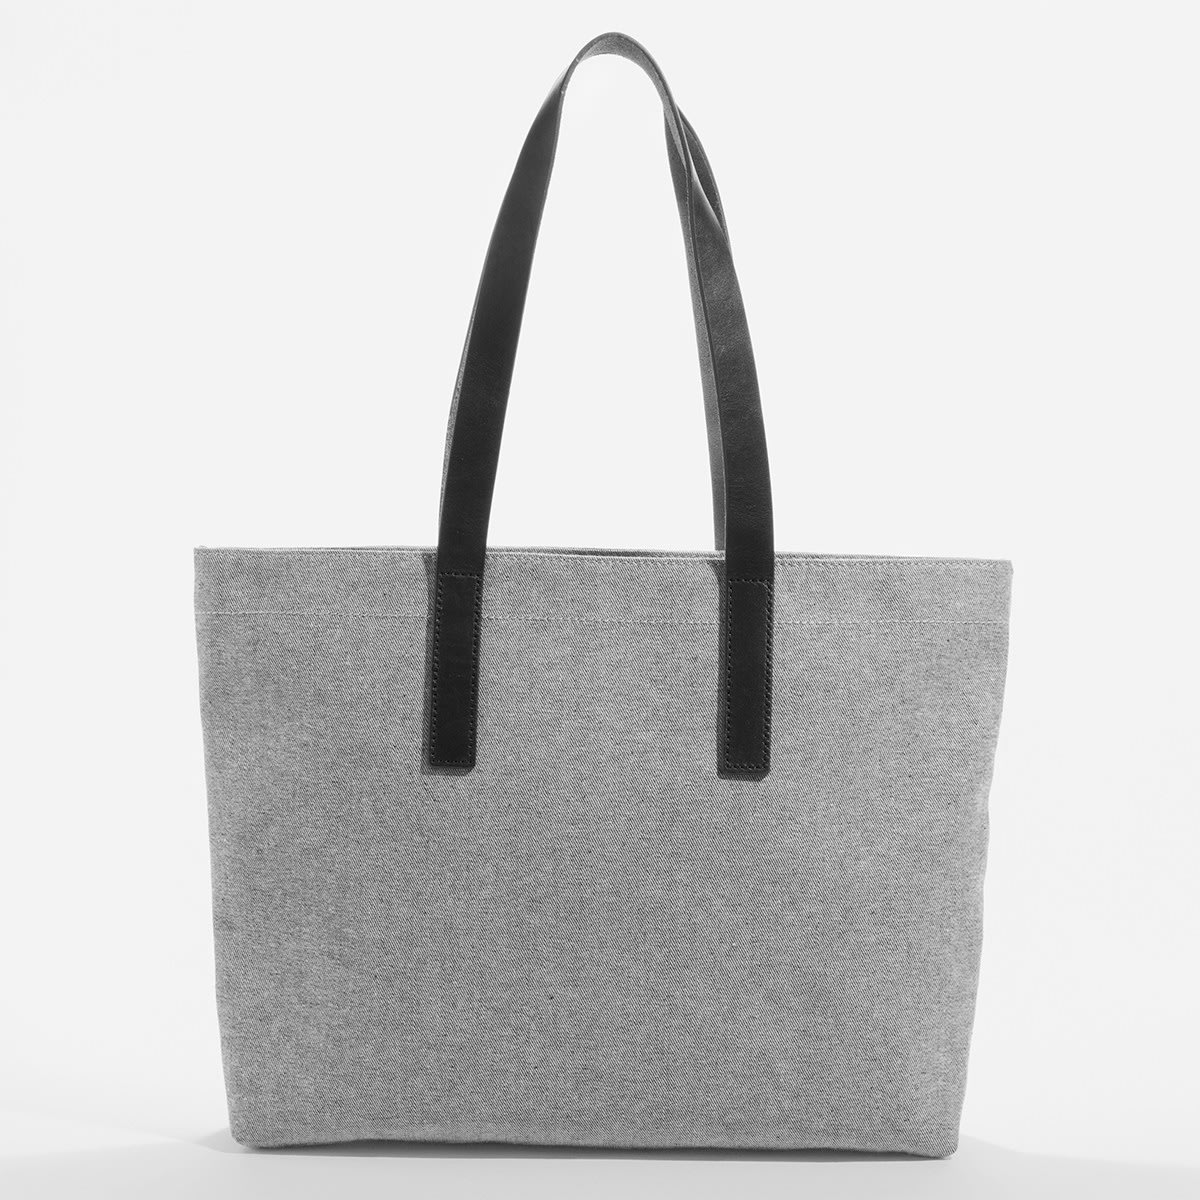 Everlane The Twill Tote Bag Canvas Reverse Denim and Black Leather